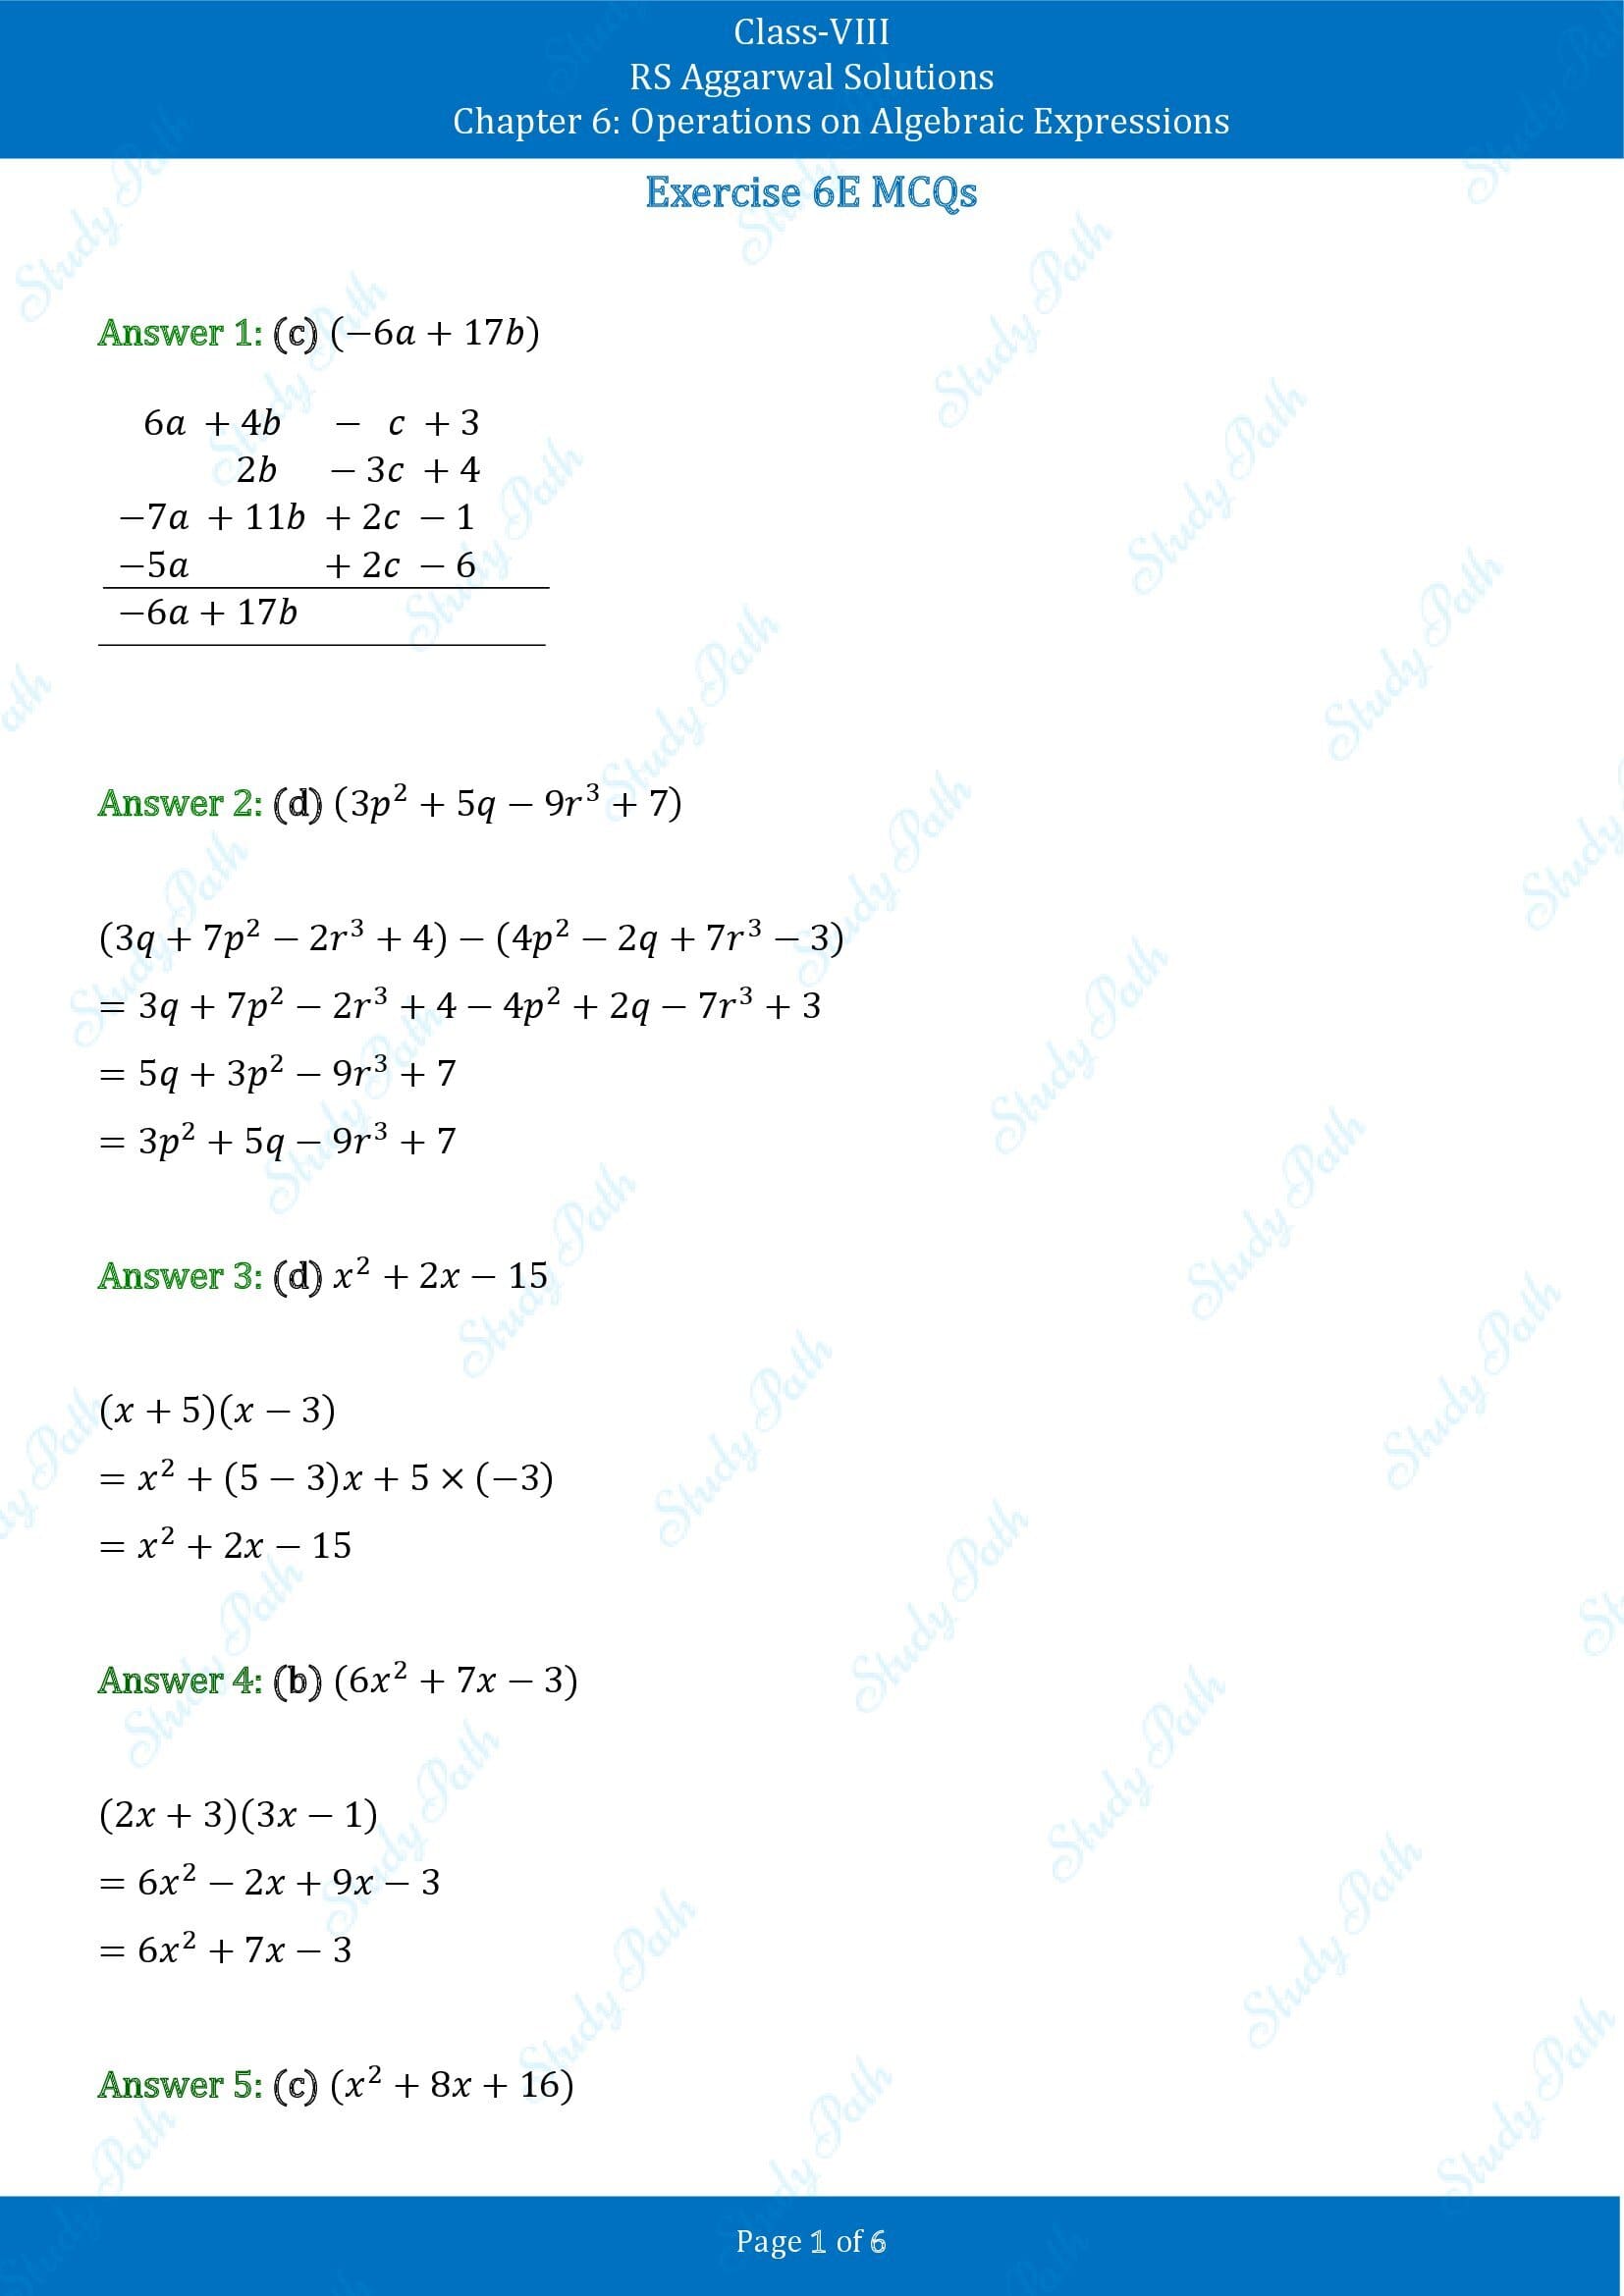 RS Aggarwal Solutions Class 8 Chapter 6 Operations on Algebraic Expressions Exercise 6E MCQs 00001